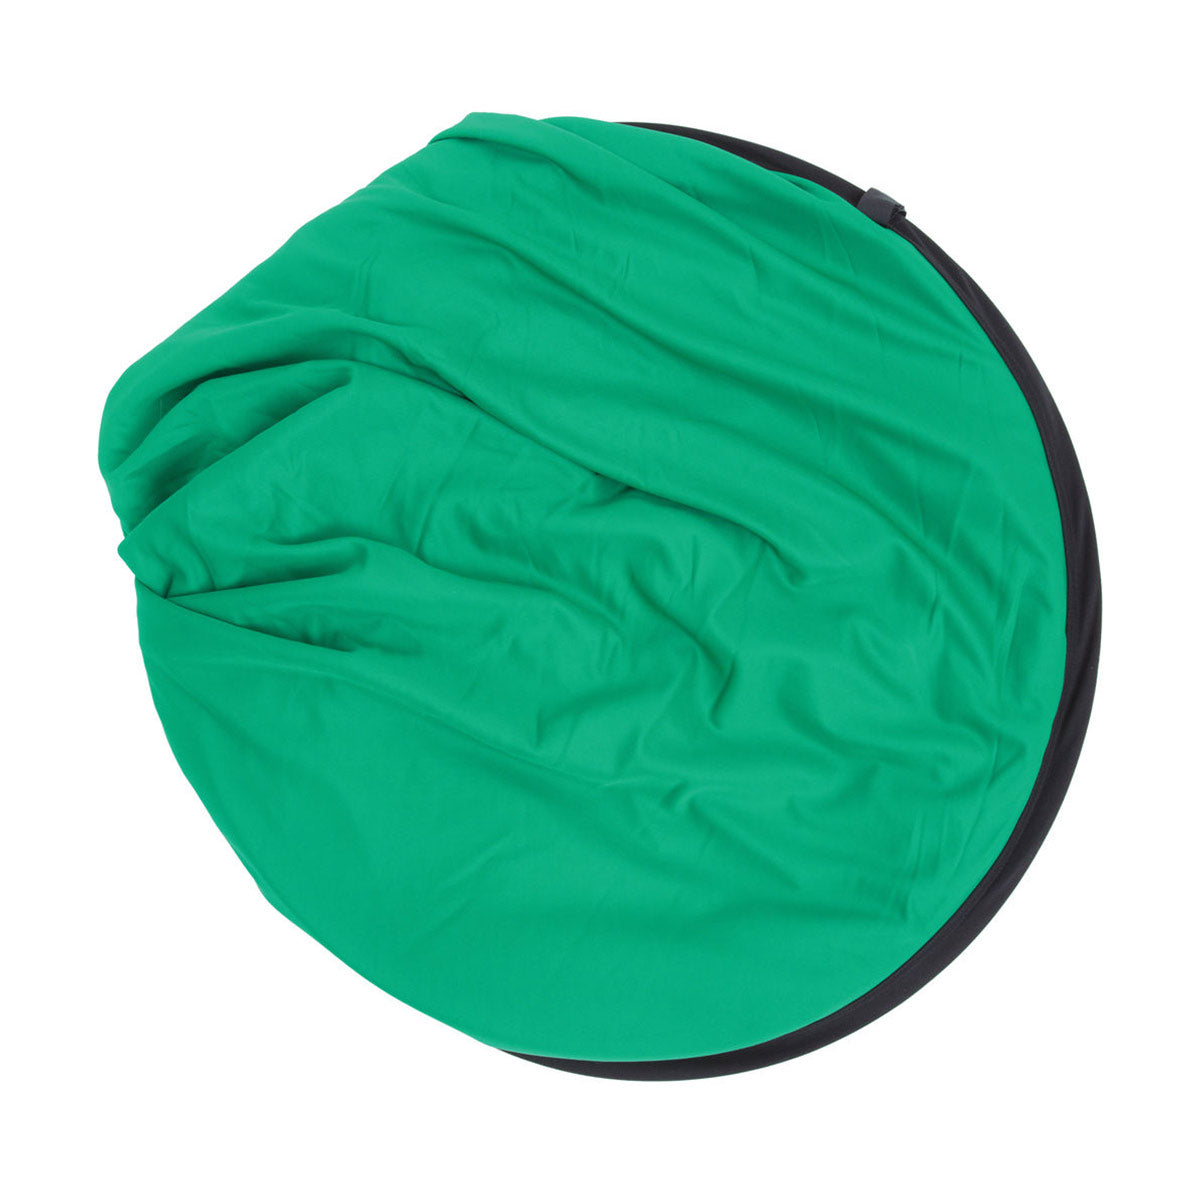 Savage Collapsible/Reversible Background (6 x 7', Chroma Green/Blue)